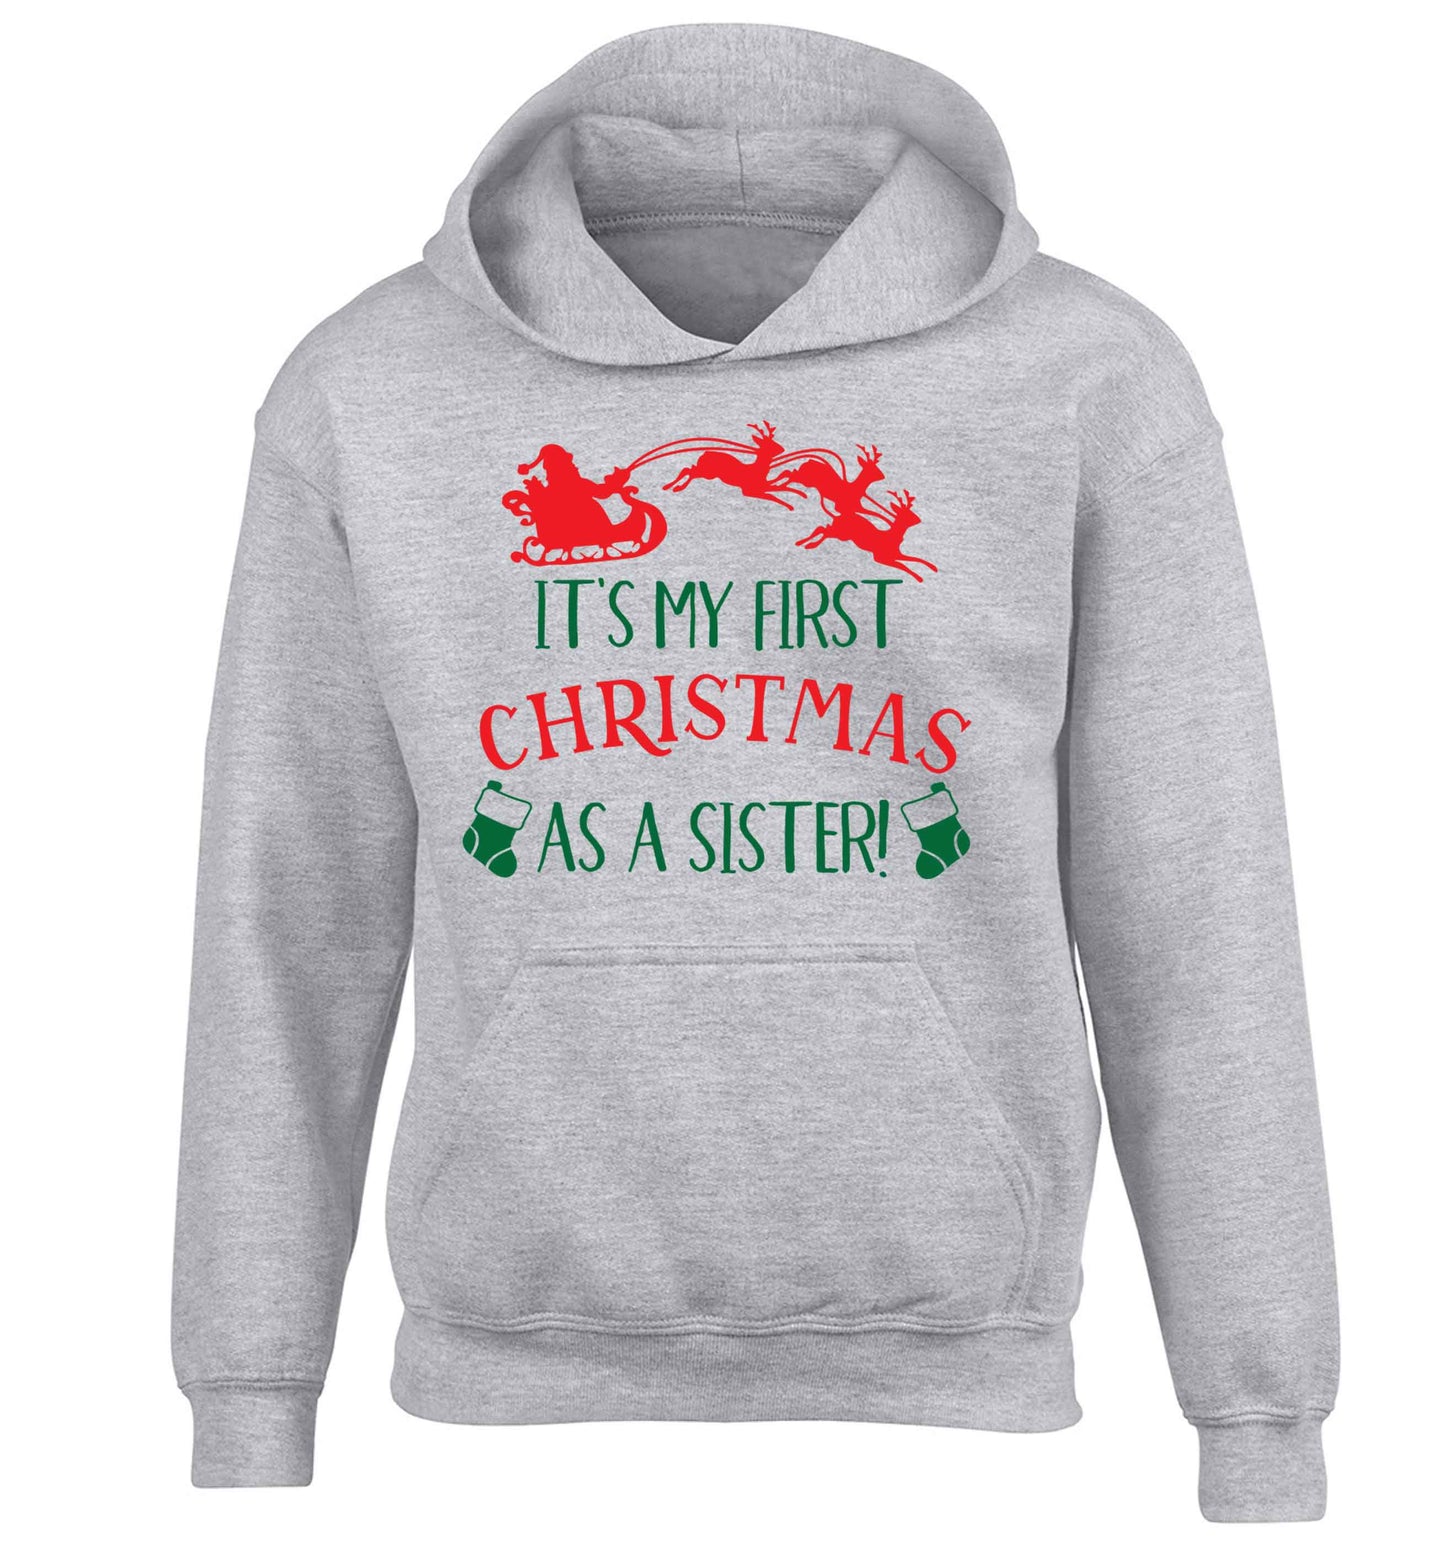 It's my first Christmas as a sister! children's grey hoodie 12-13 Years